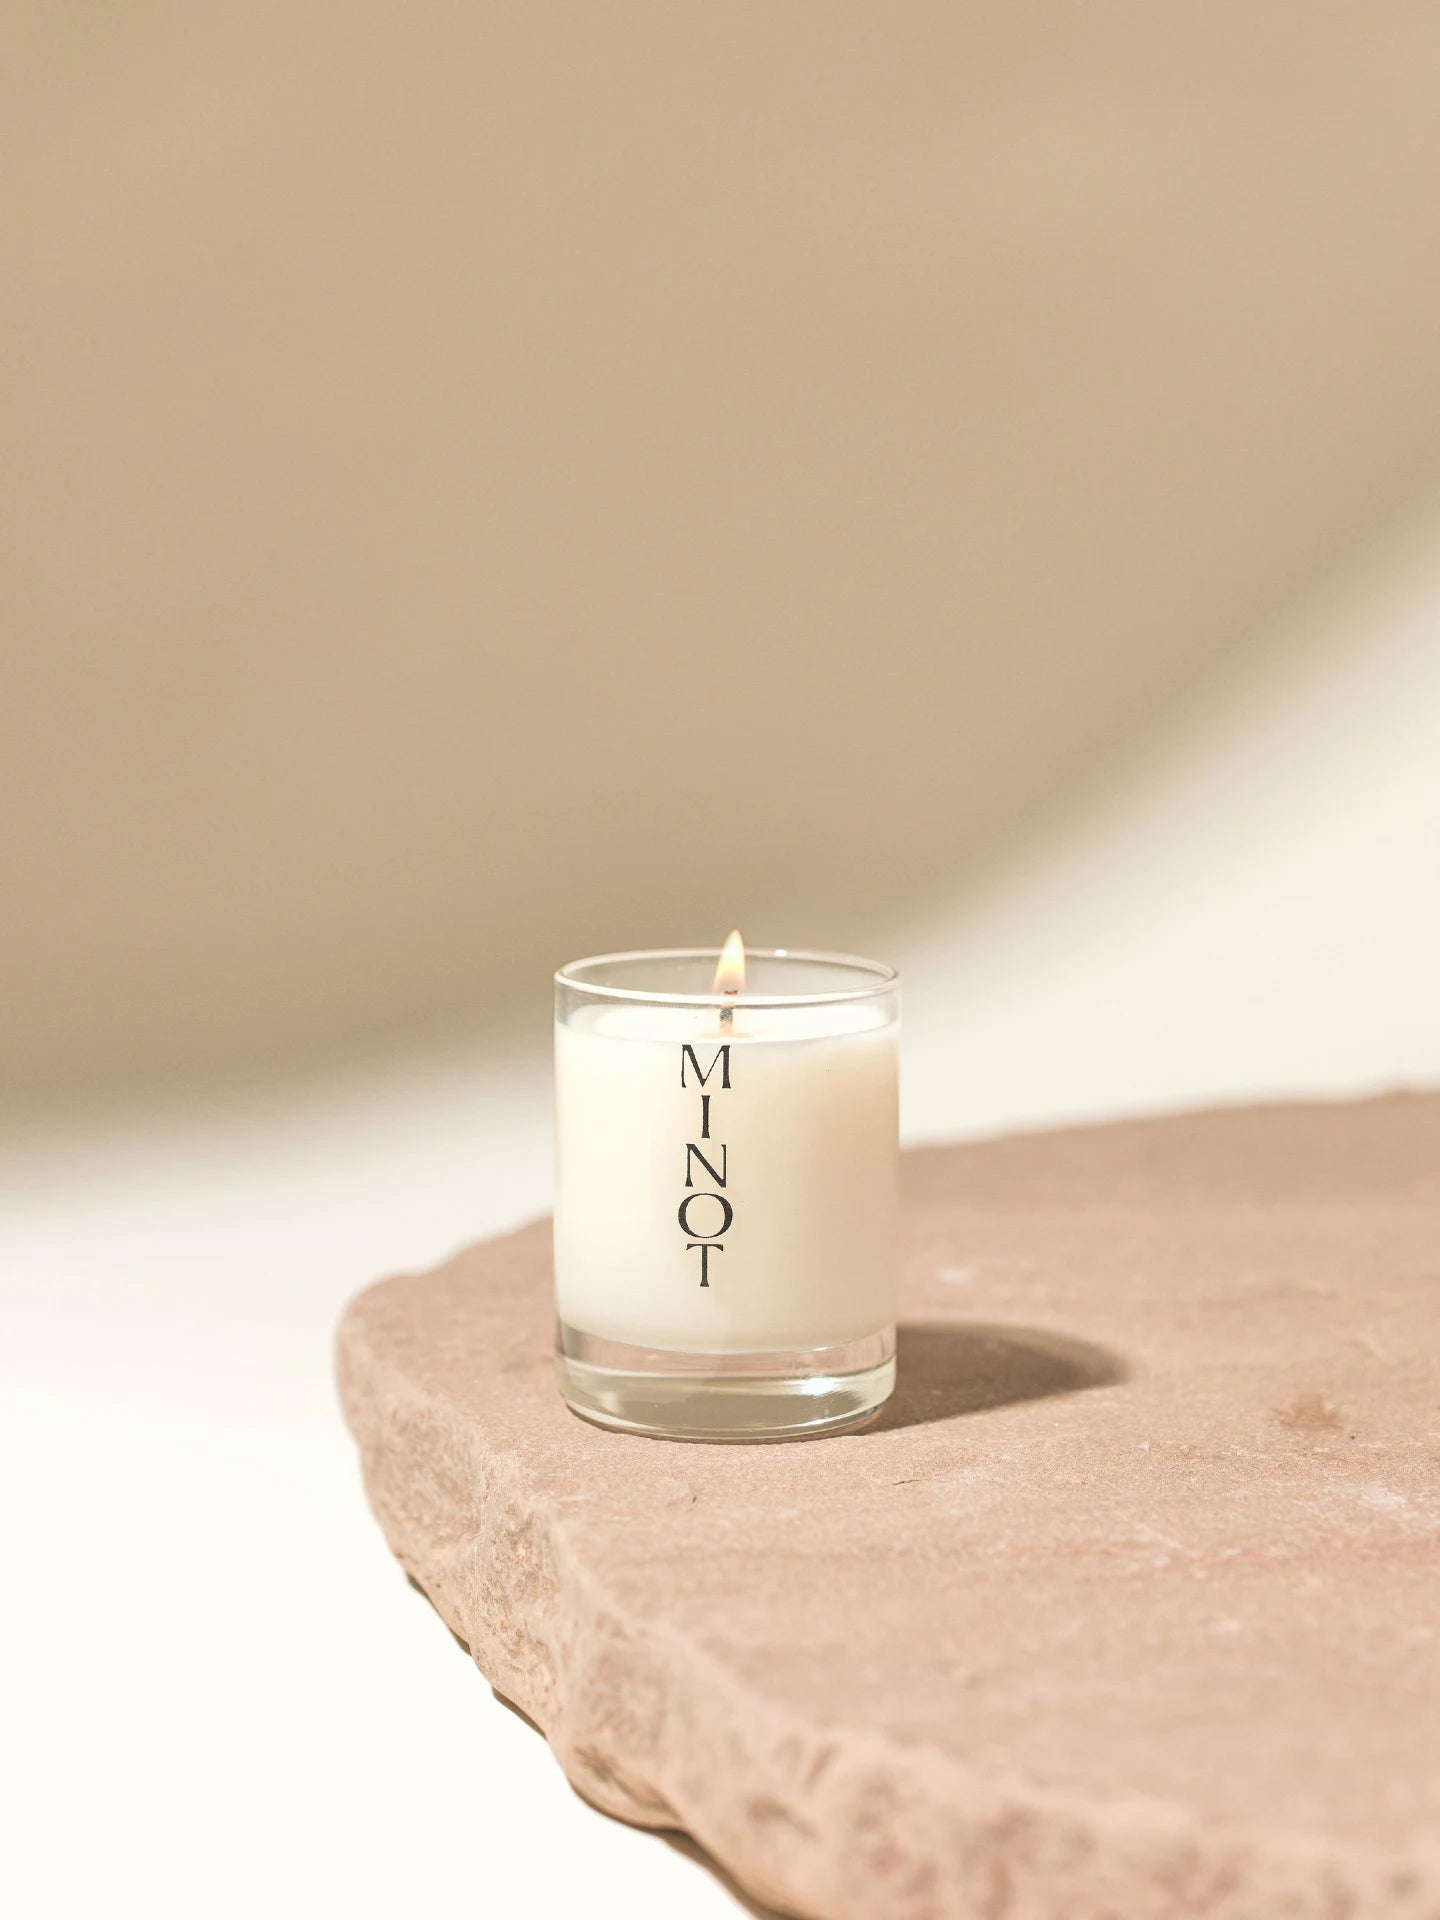 A sweet, bright scent blend of freesia, vanilla, and citrus emanate from the Sunbeam Mini candle